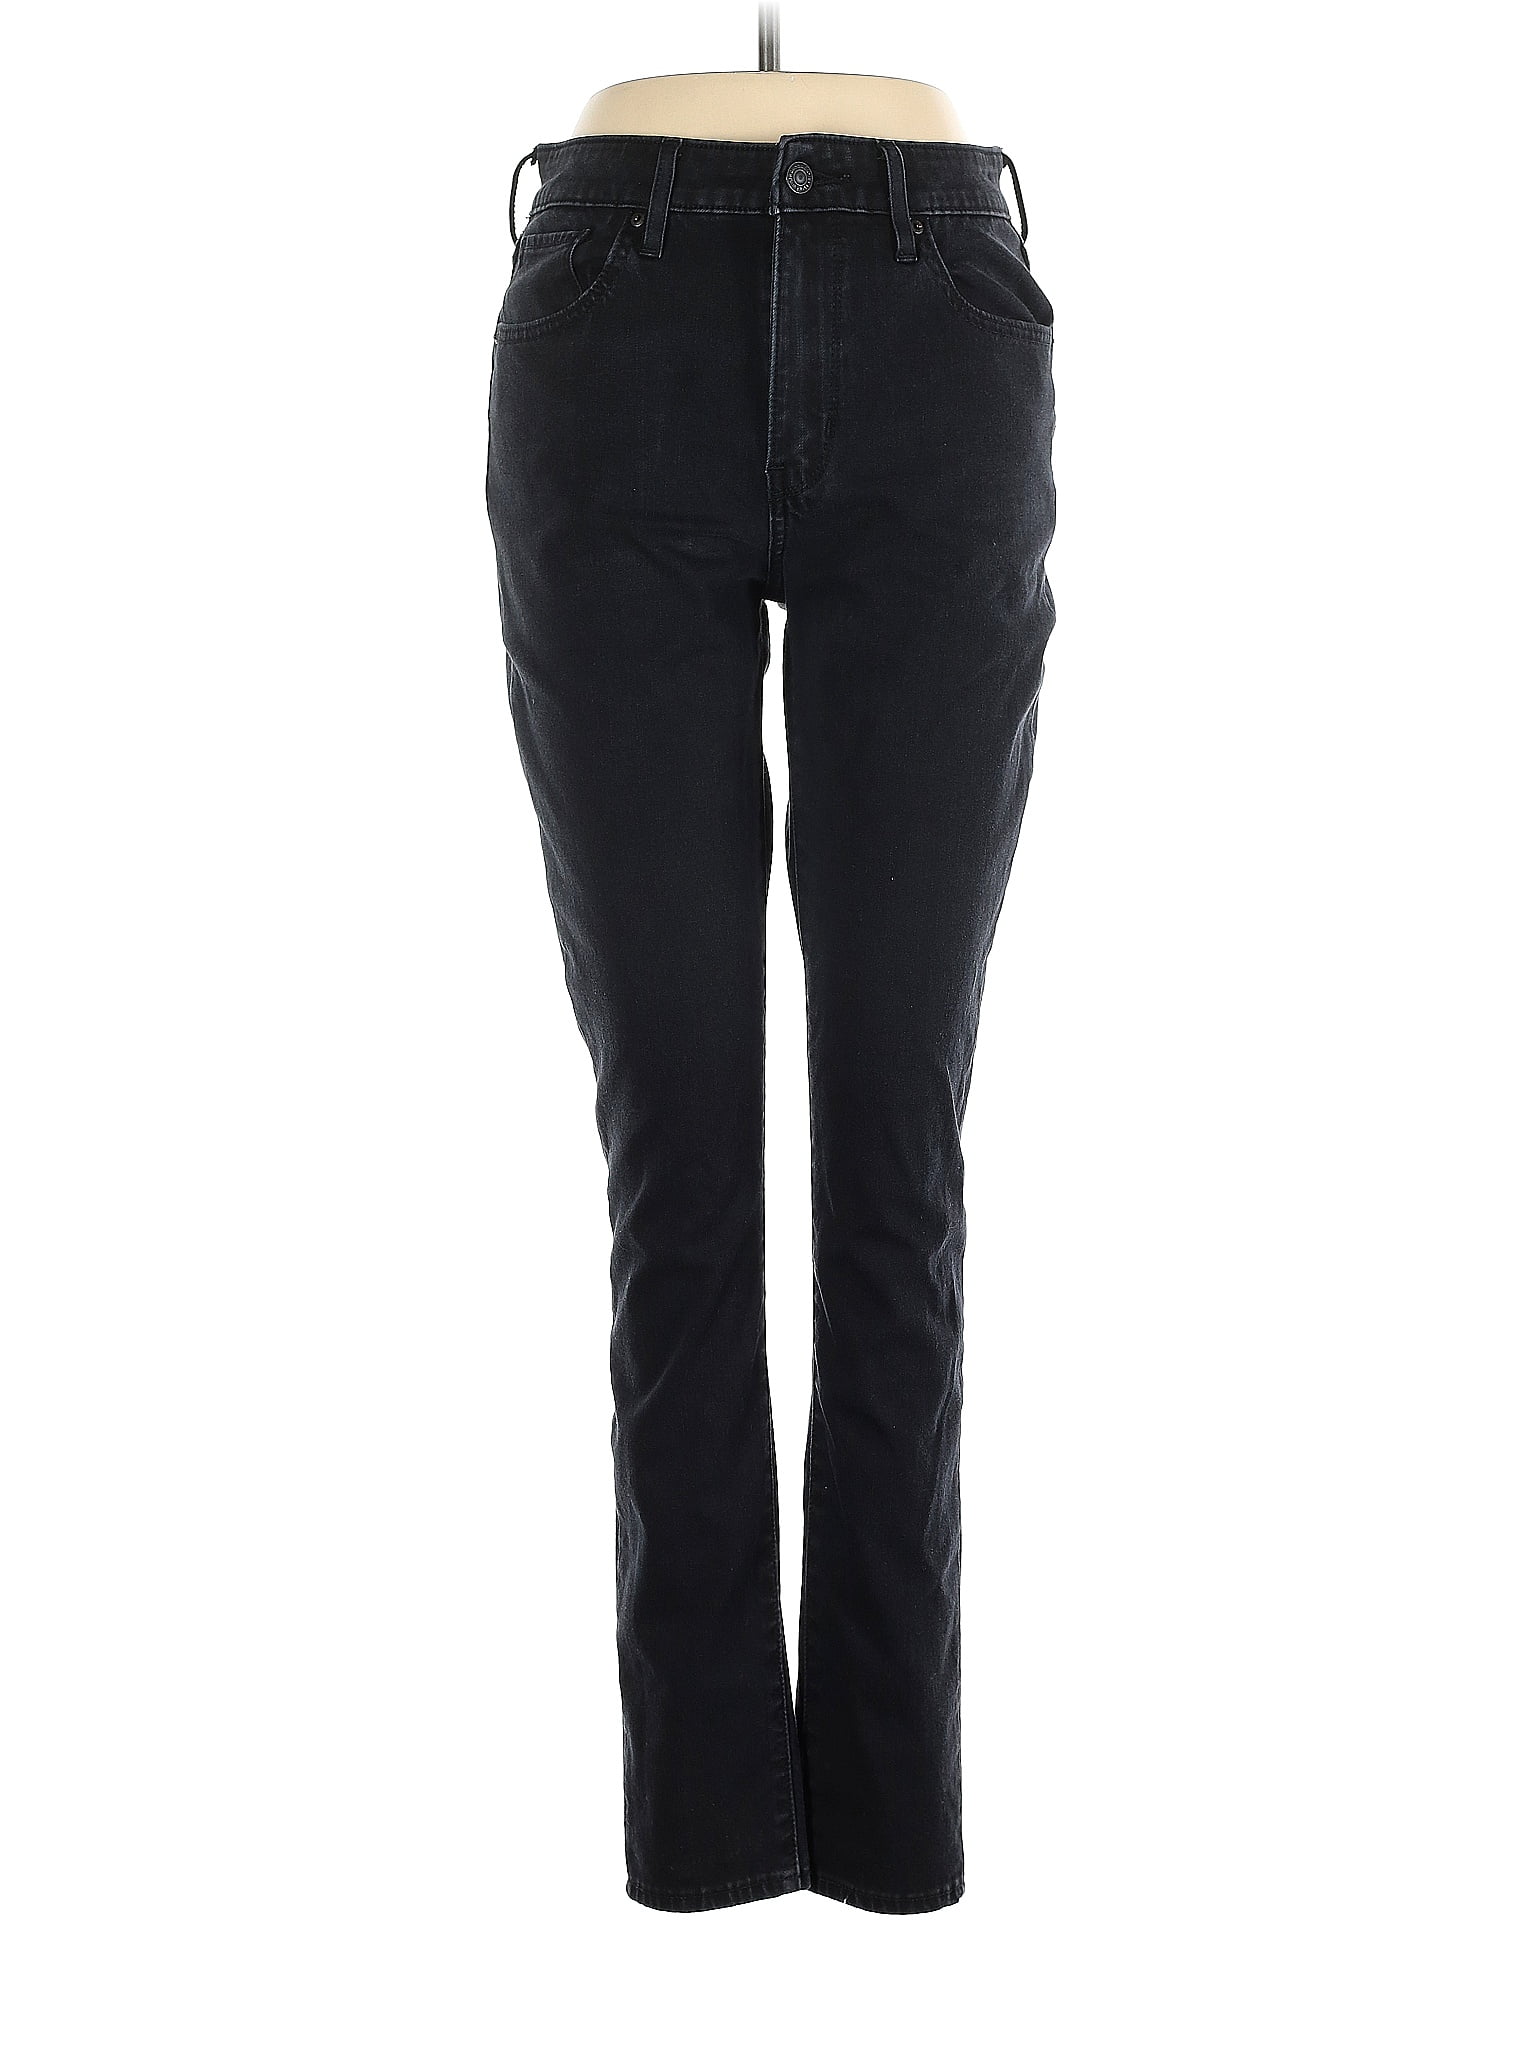 Levi's High-Waisted Taper Jeans Size 26 - $35 (68% Off Retail